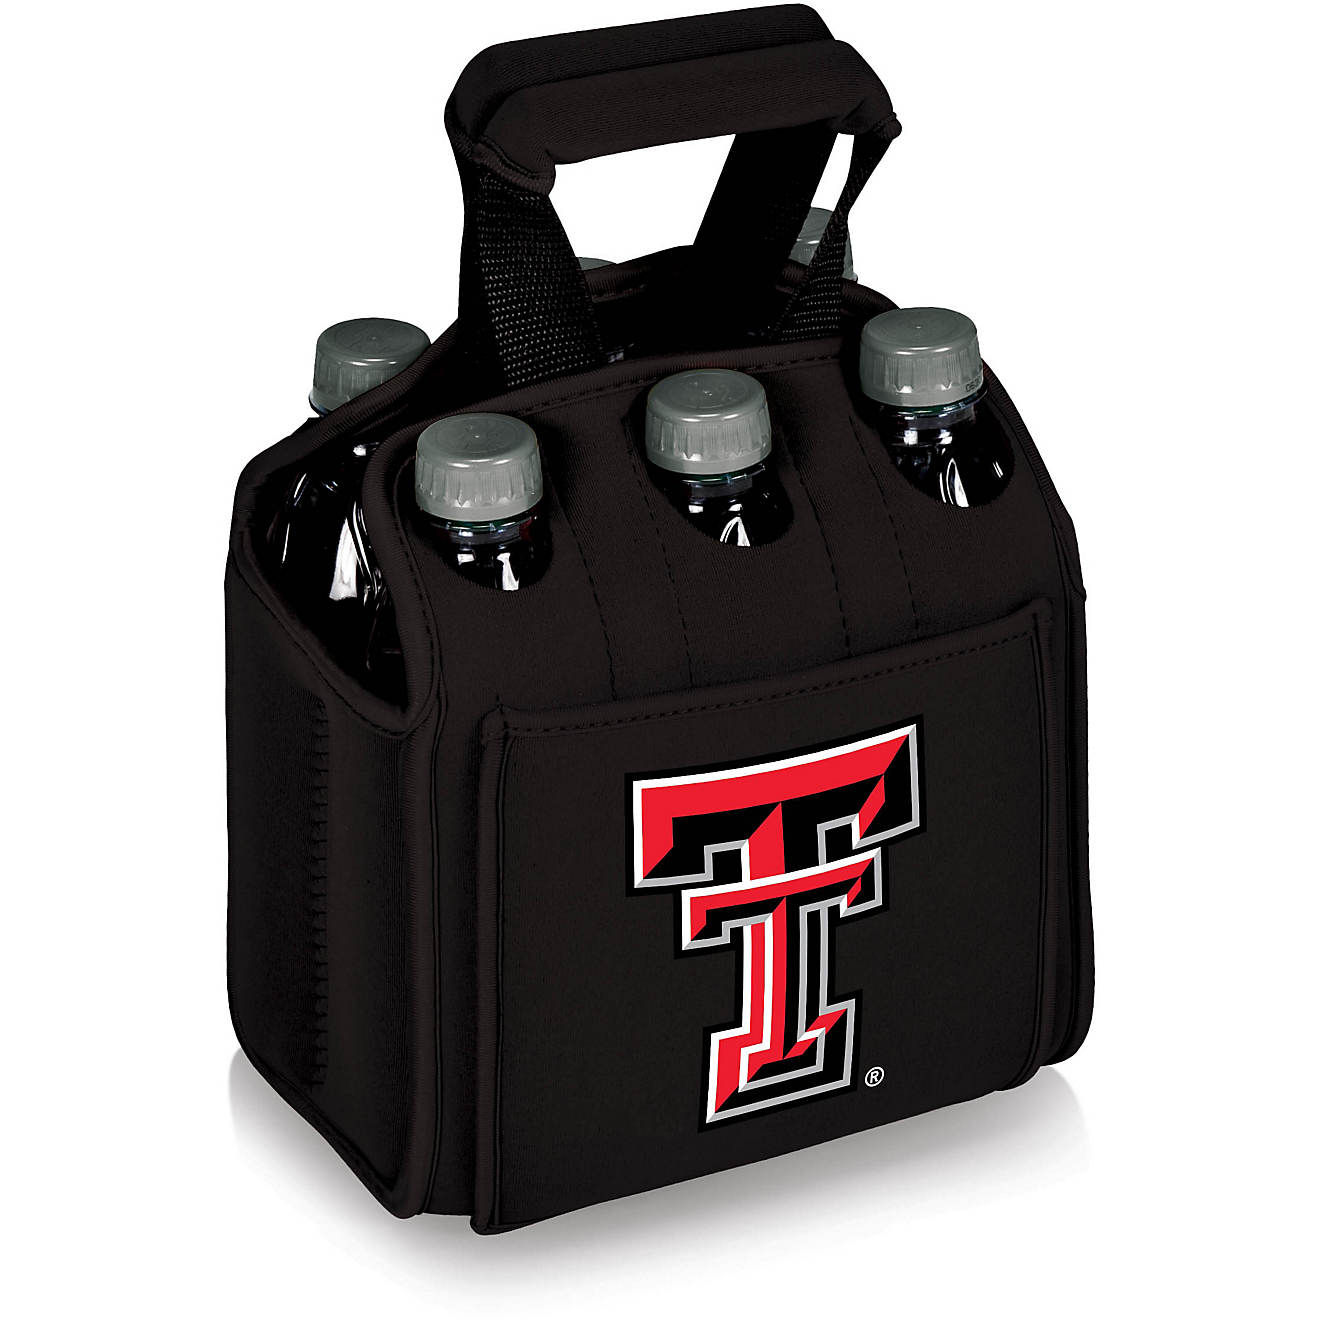 Picnic Time Texas Tech University 6-Pack Beverage Carrier                                                                        - view number 1